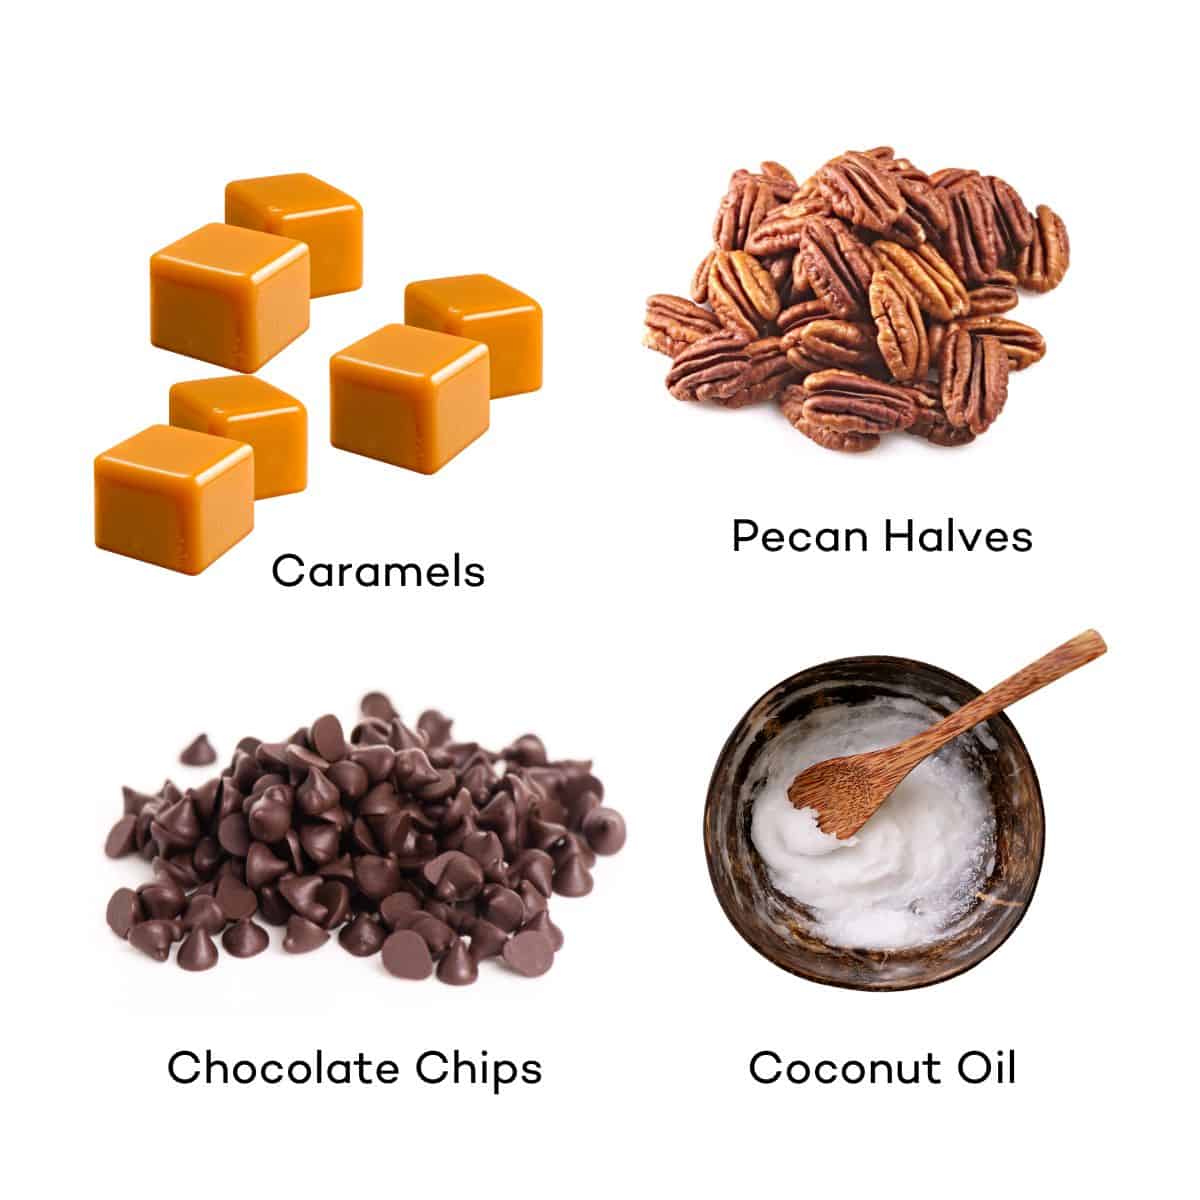 Ingredients for Turtle Candies